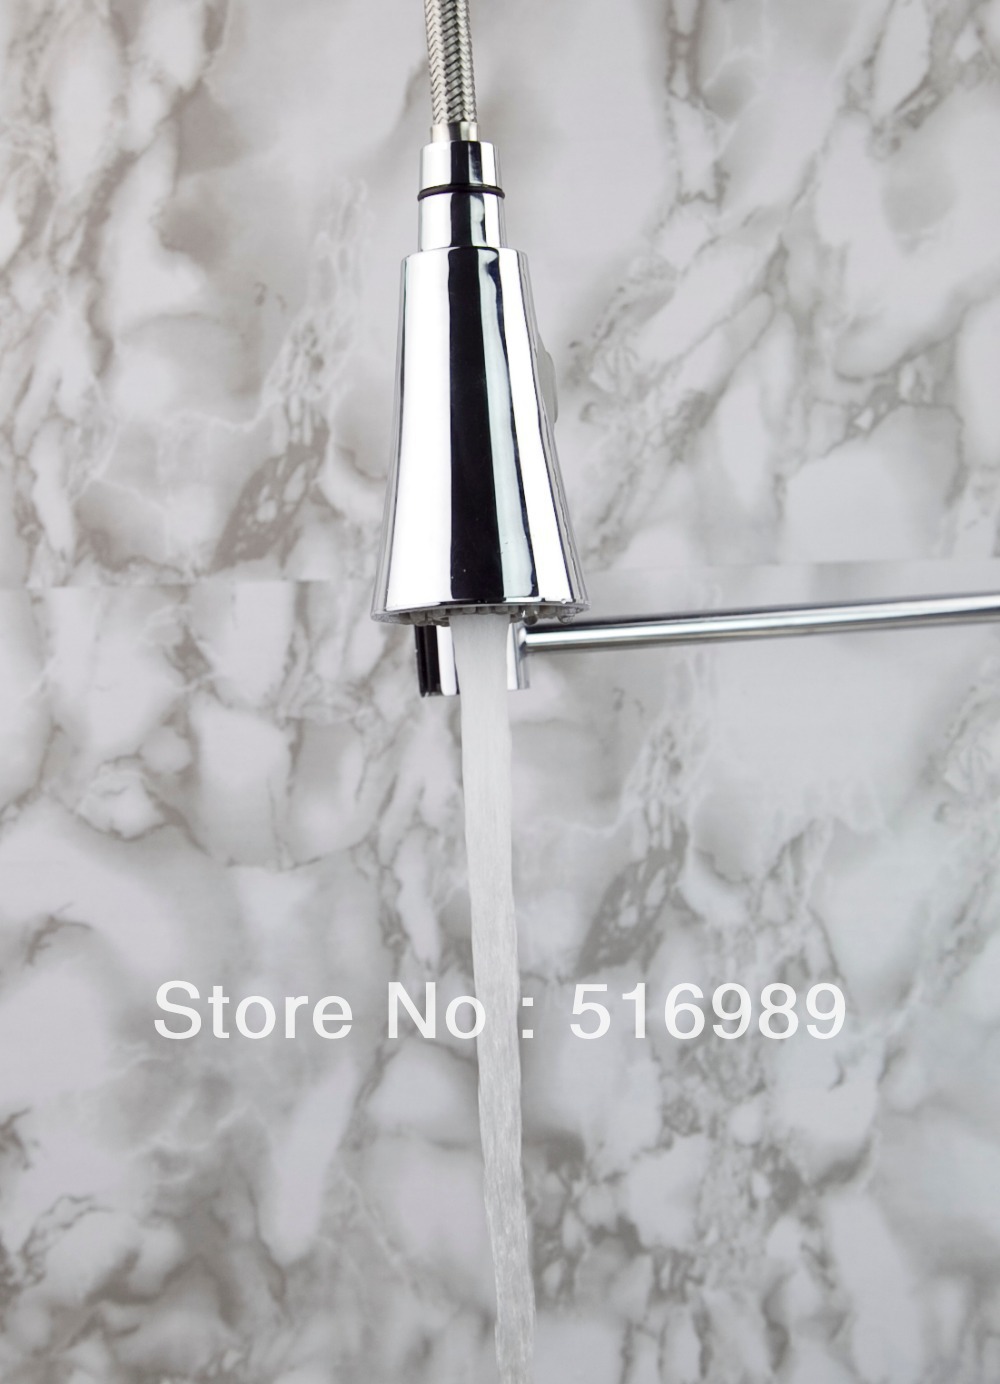 chrome pull out kitchen faucet one hole/handle mixer tap faucet leon75 - Click Image to Close